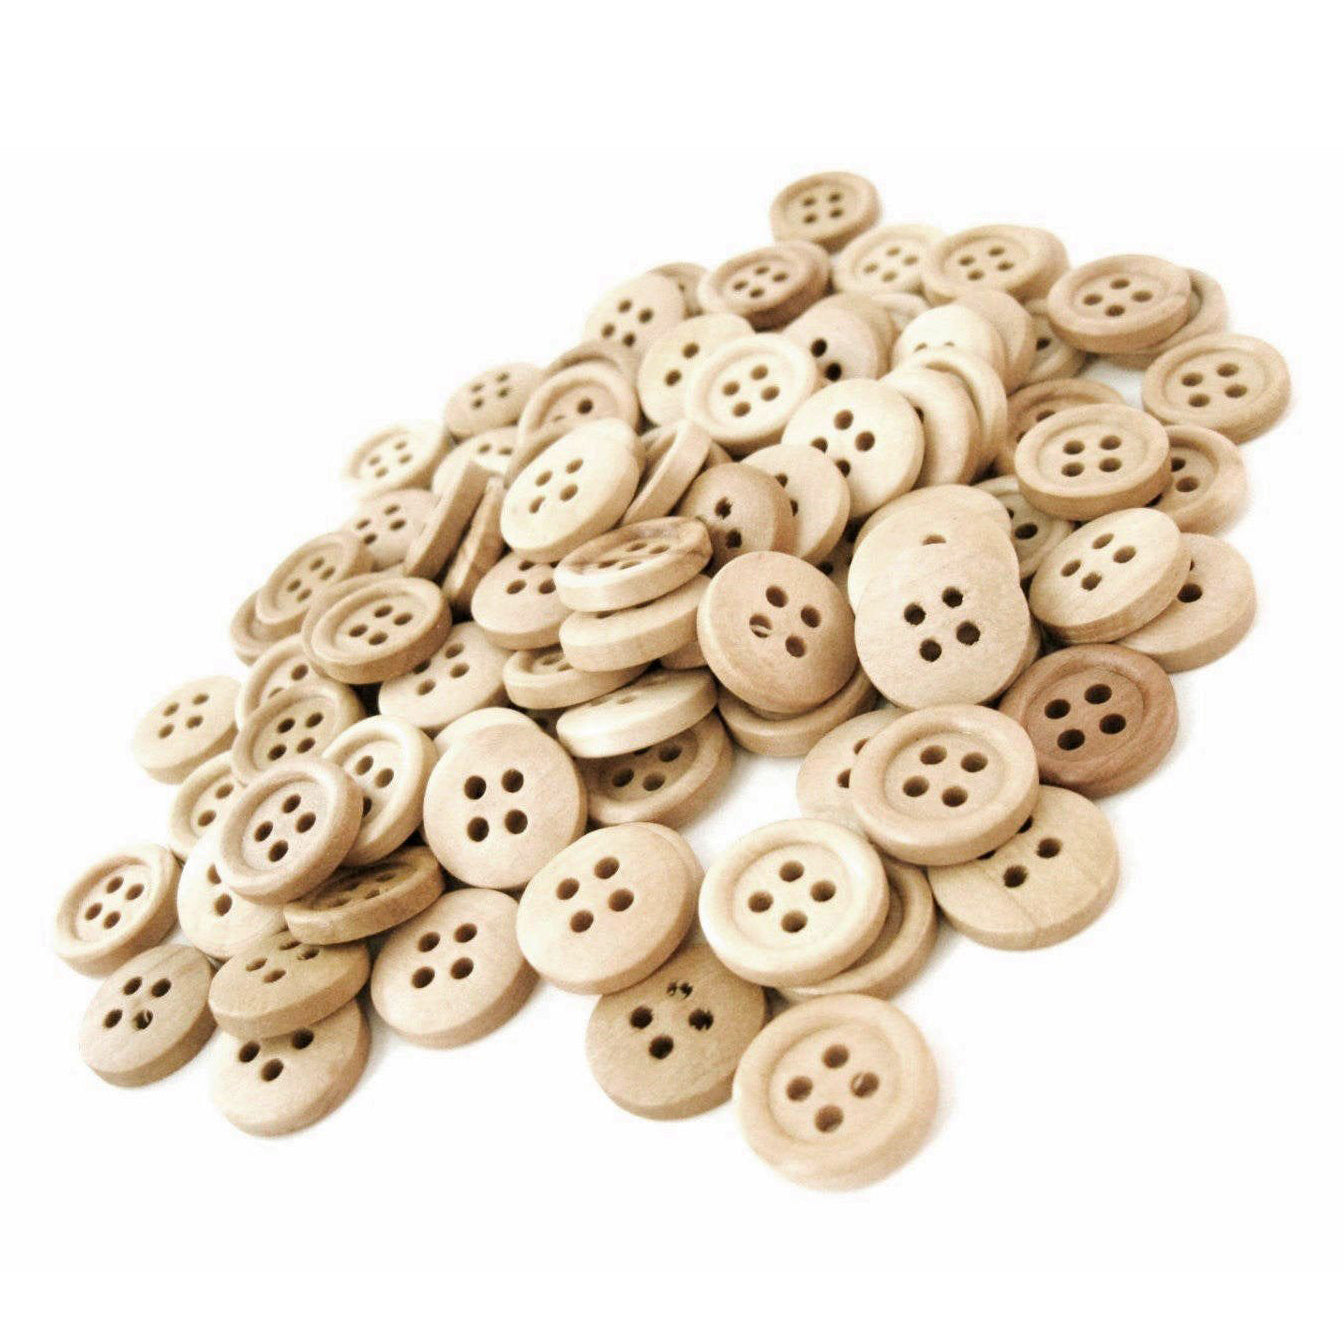 Dark brown Wooden Sewing Buttons 30mm - set of 6 natural wood buttons